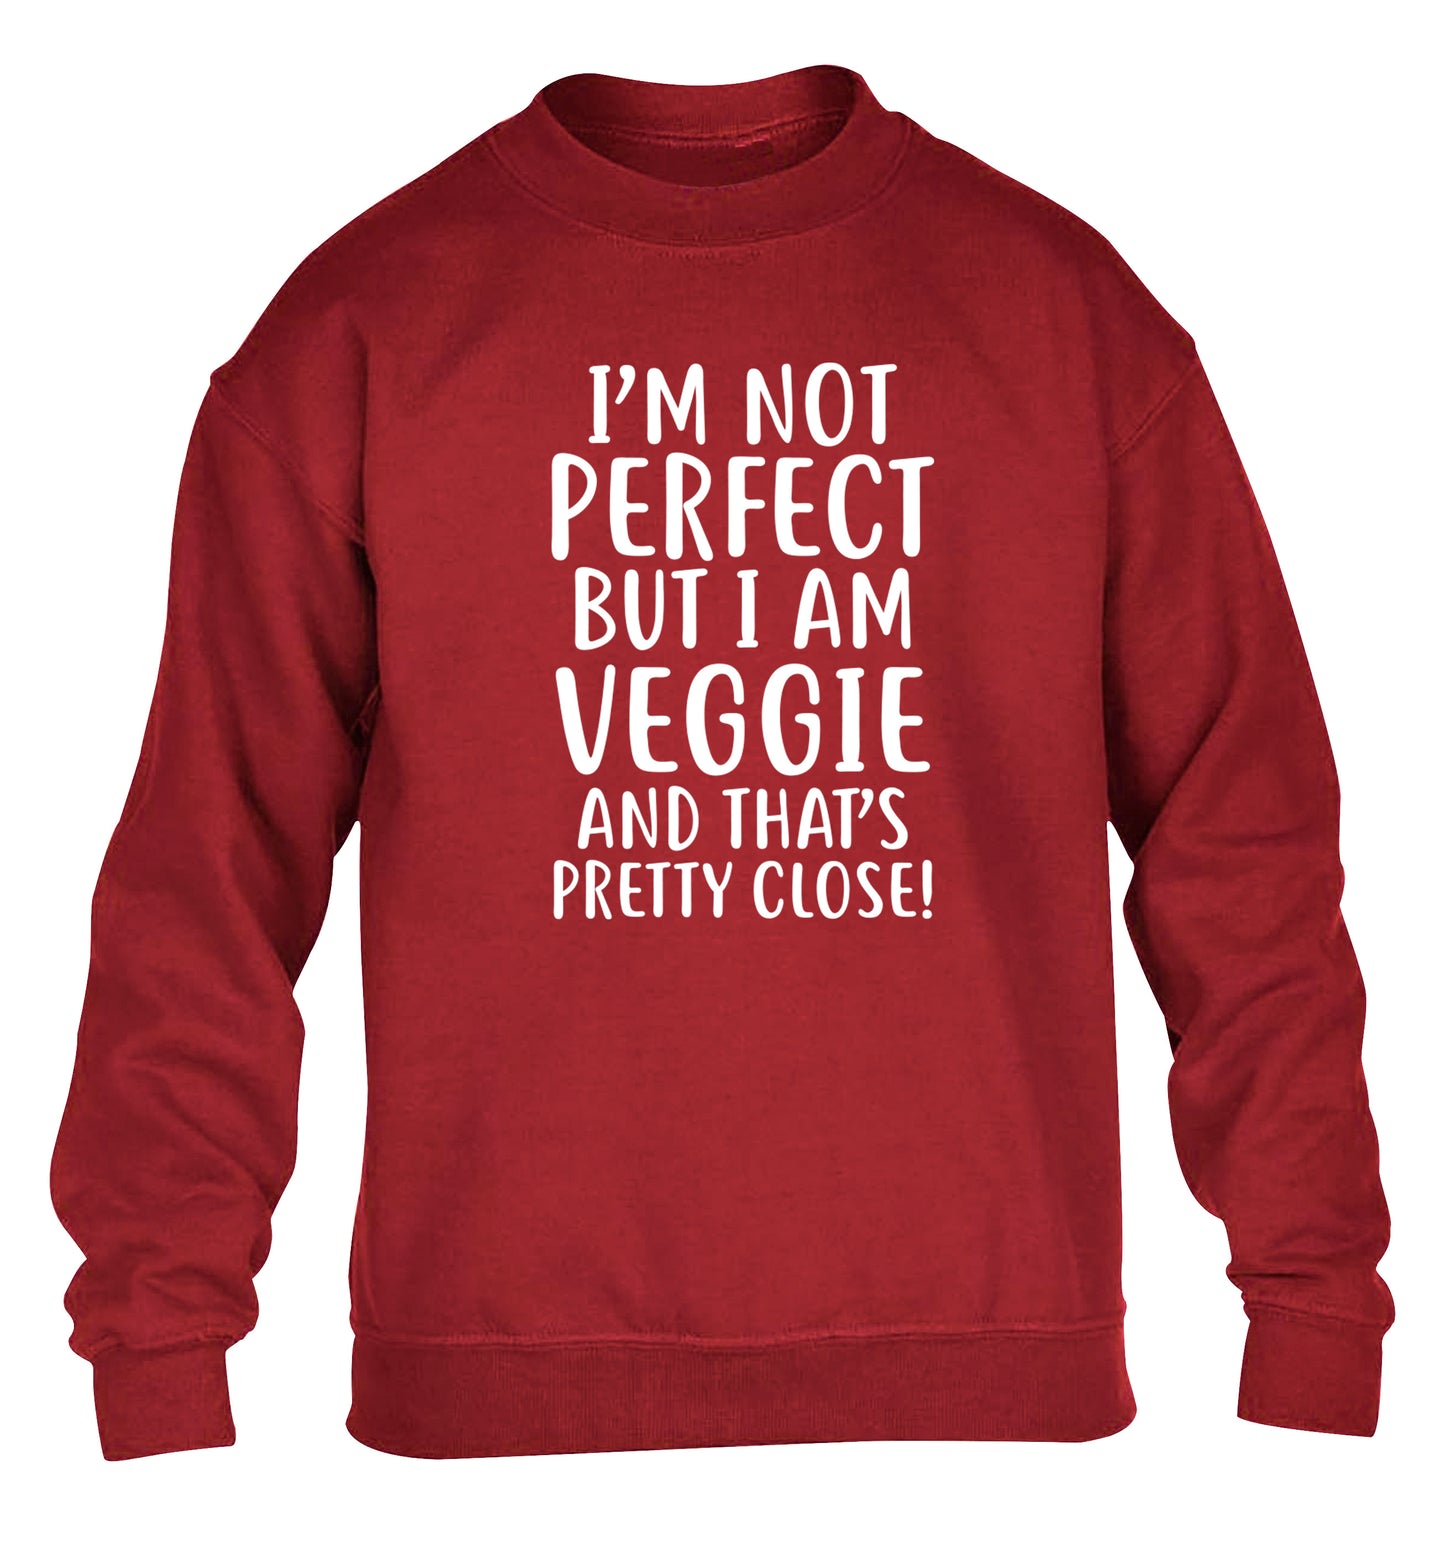 Might not be perfect but I am veggie children's grey sweater 12-13 Years